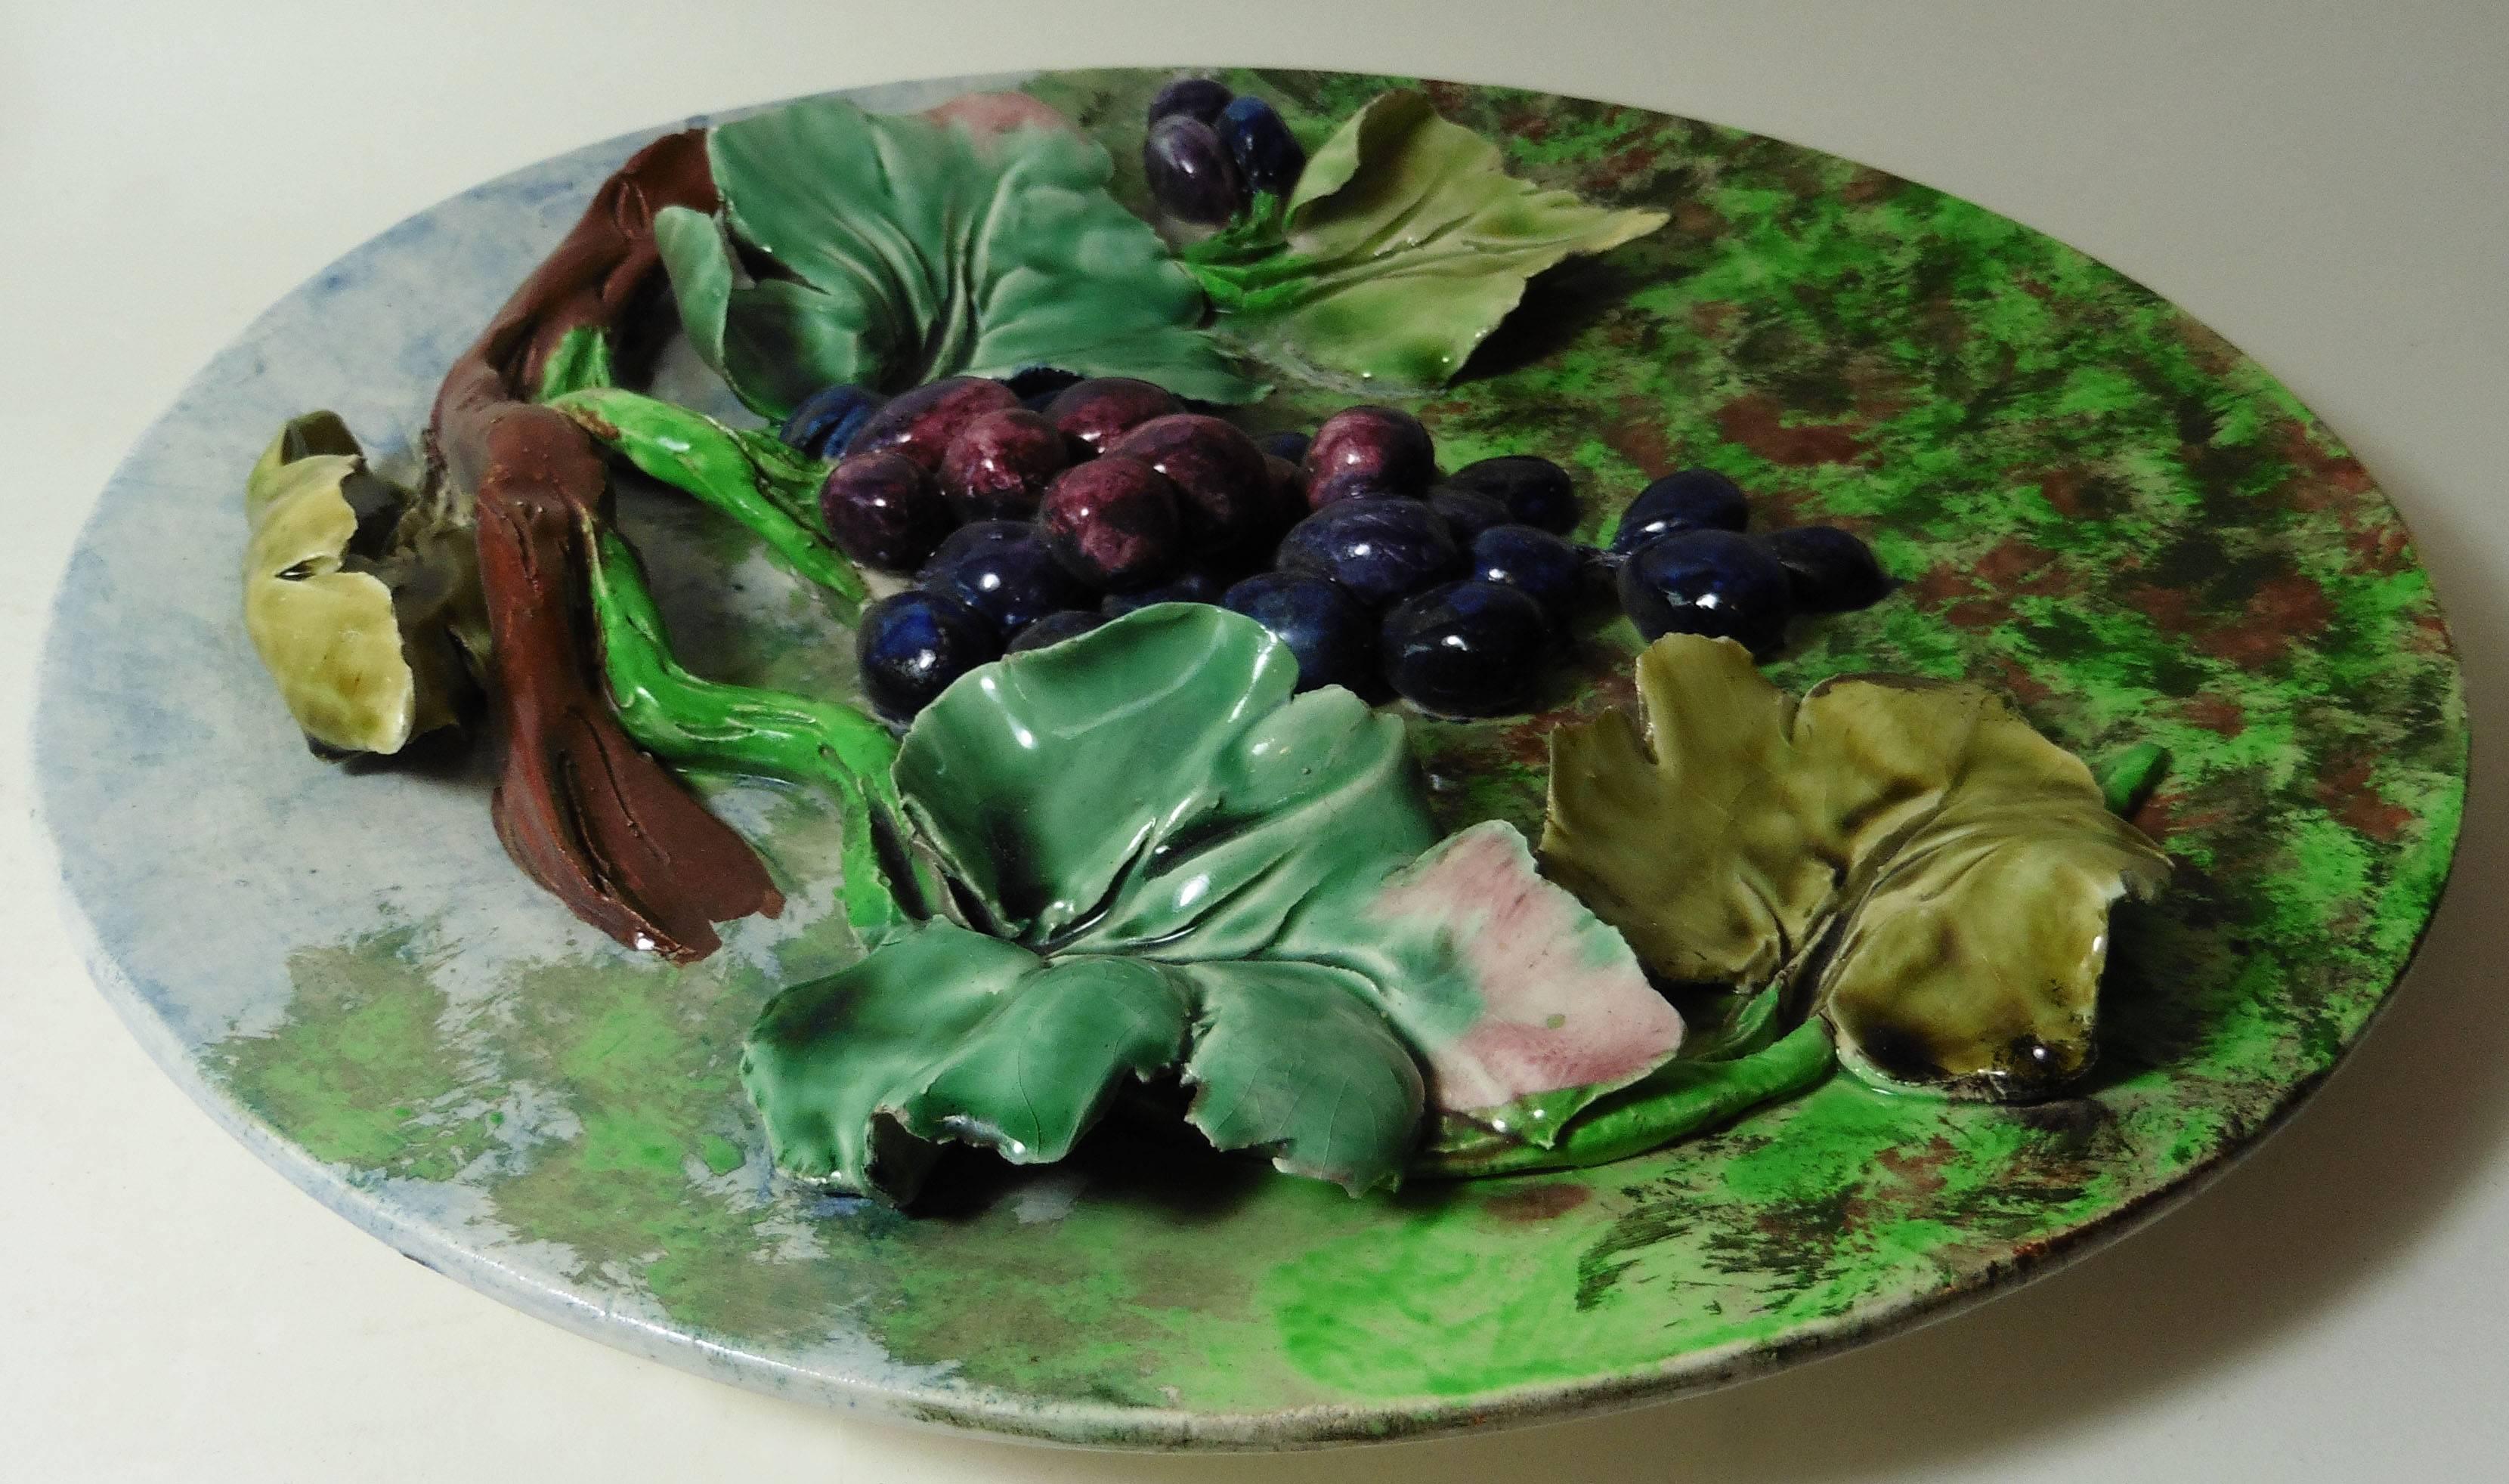 Colorful 19th century French Majolica grapes wall platter signed Longchamp terre de fer. The fruits are in high relief with the leaves and branches.
The manufacture of Longchamp produced this fruits platters with various fruits in four different